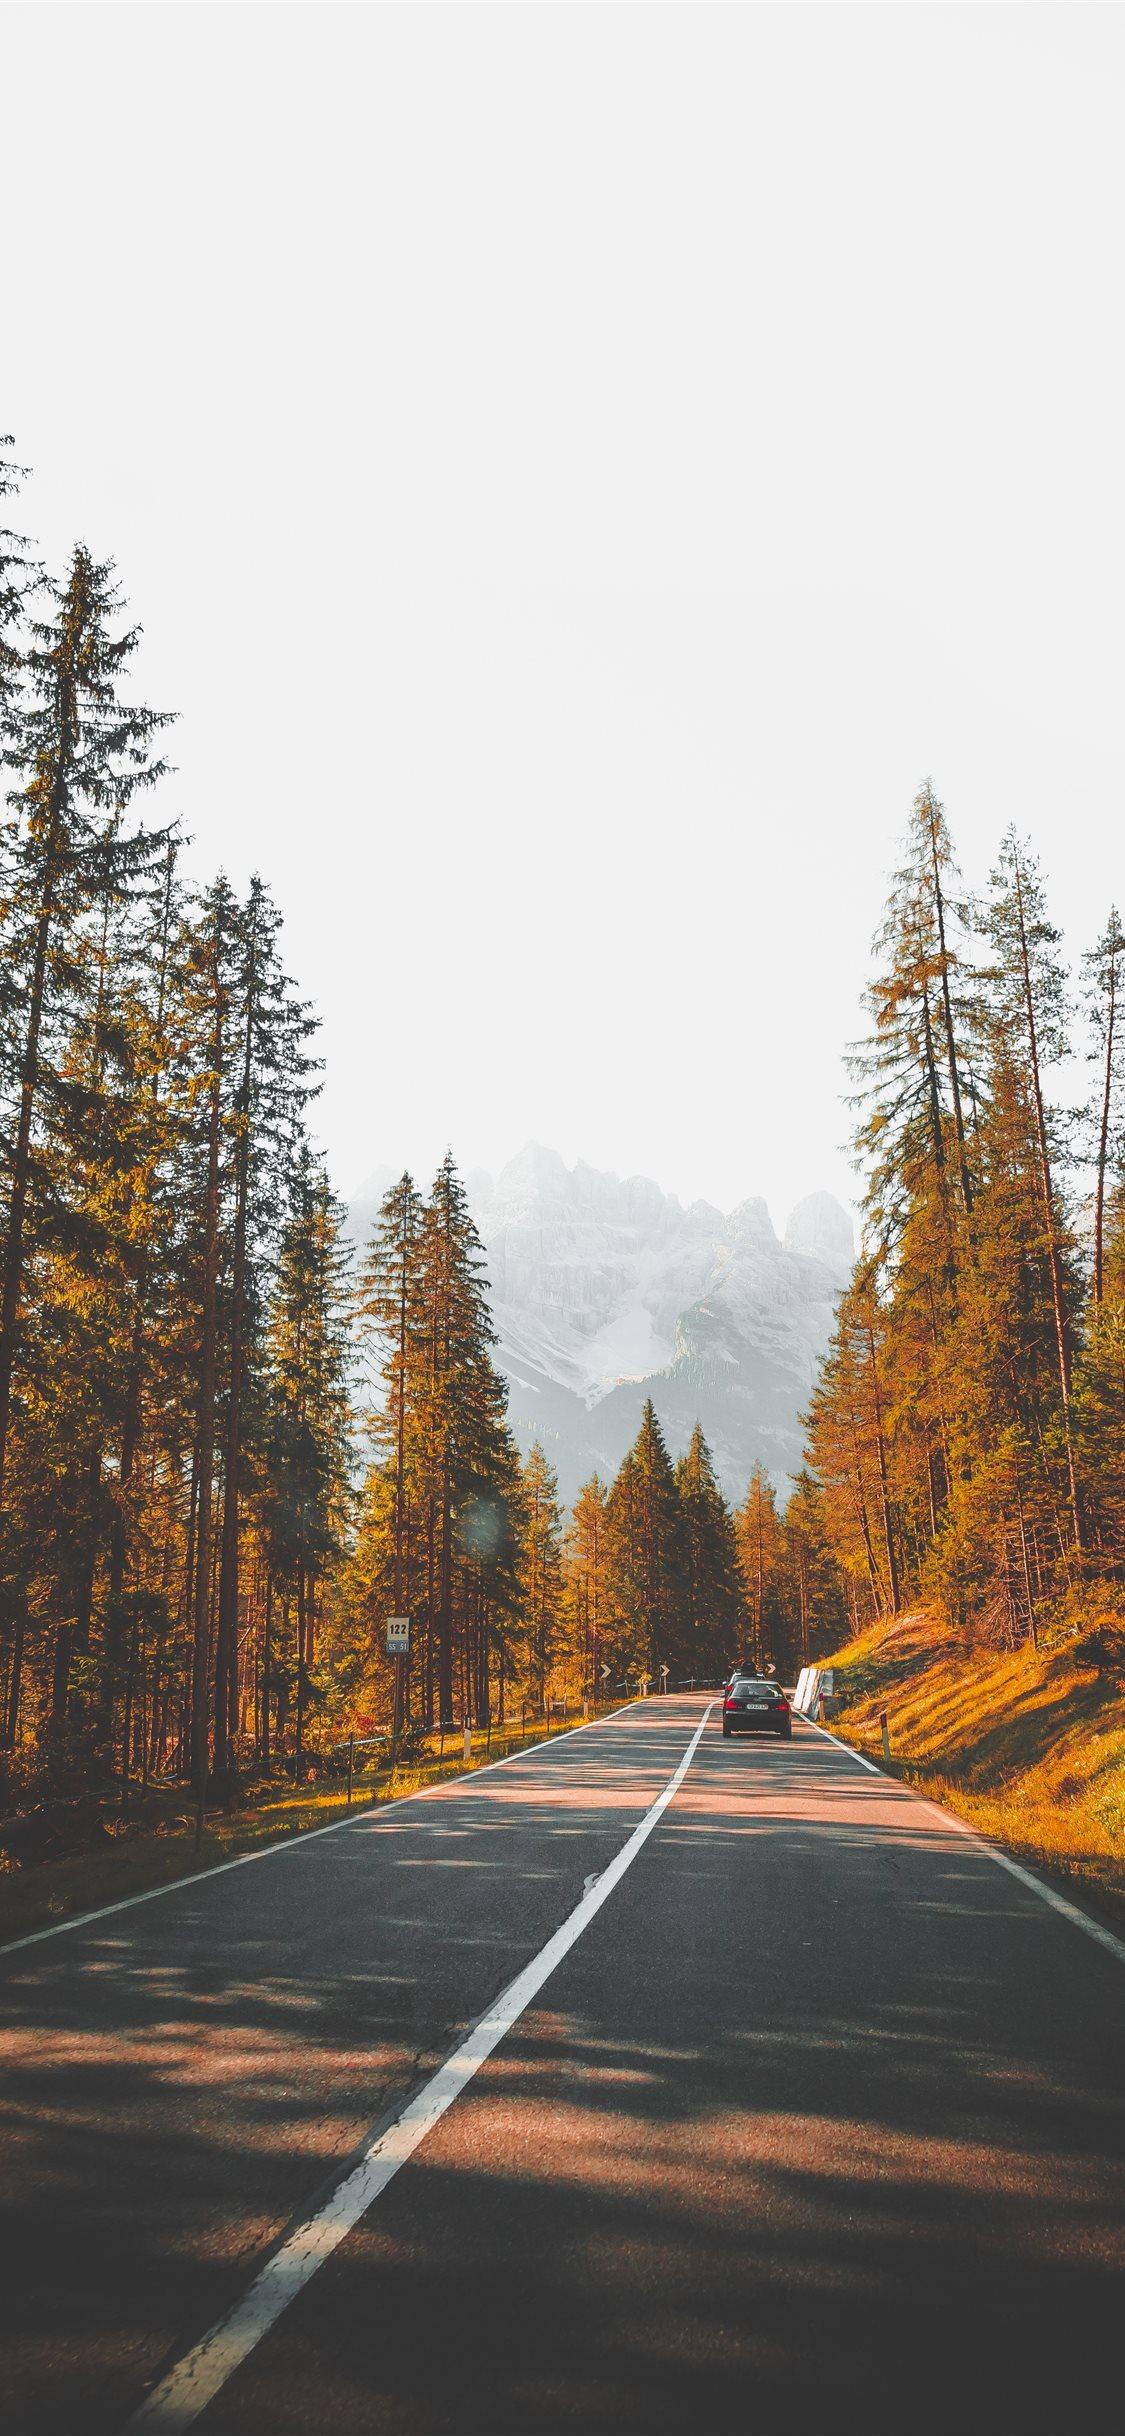 South Tyrol 1 iPhone X Wallpaper Free Download